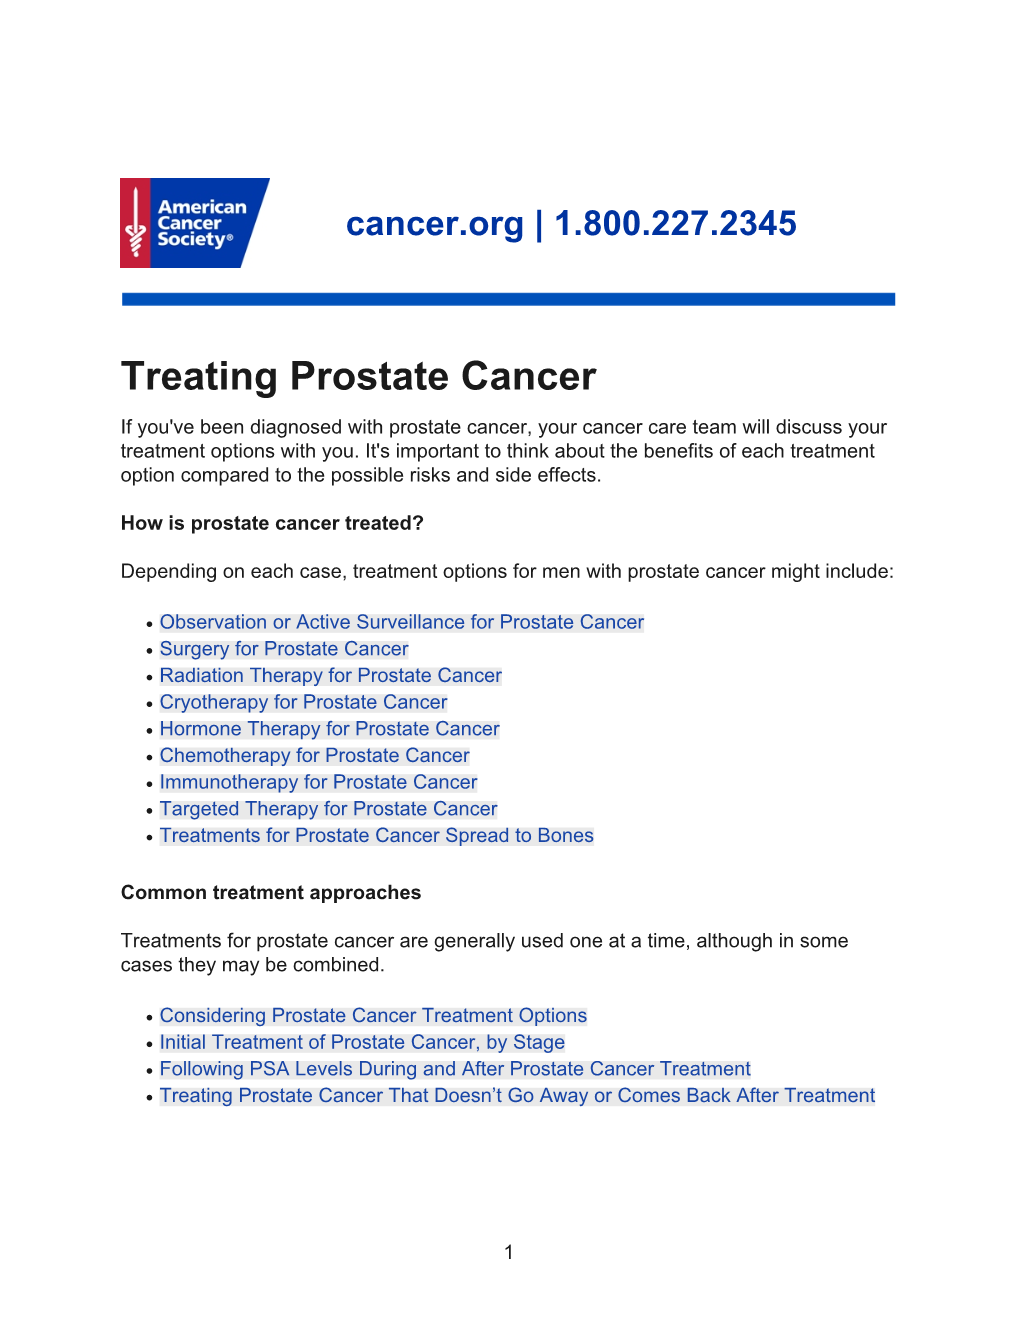 Treating Prostate Cancer If You've Been Diagnosed with Prostate Cancer, Your Cancer Care Team Will Discuss Your Treatment Options with You